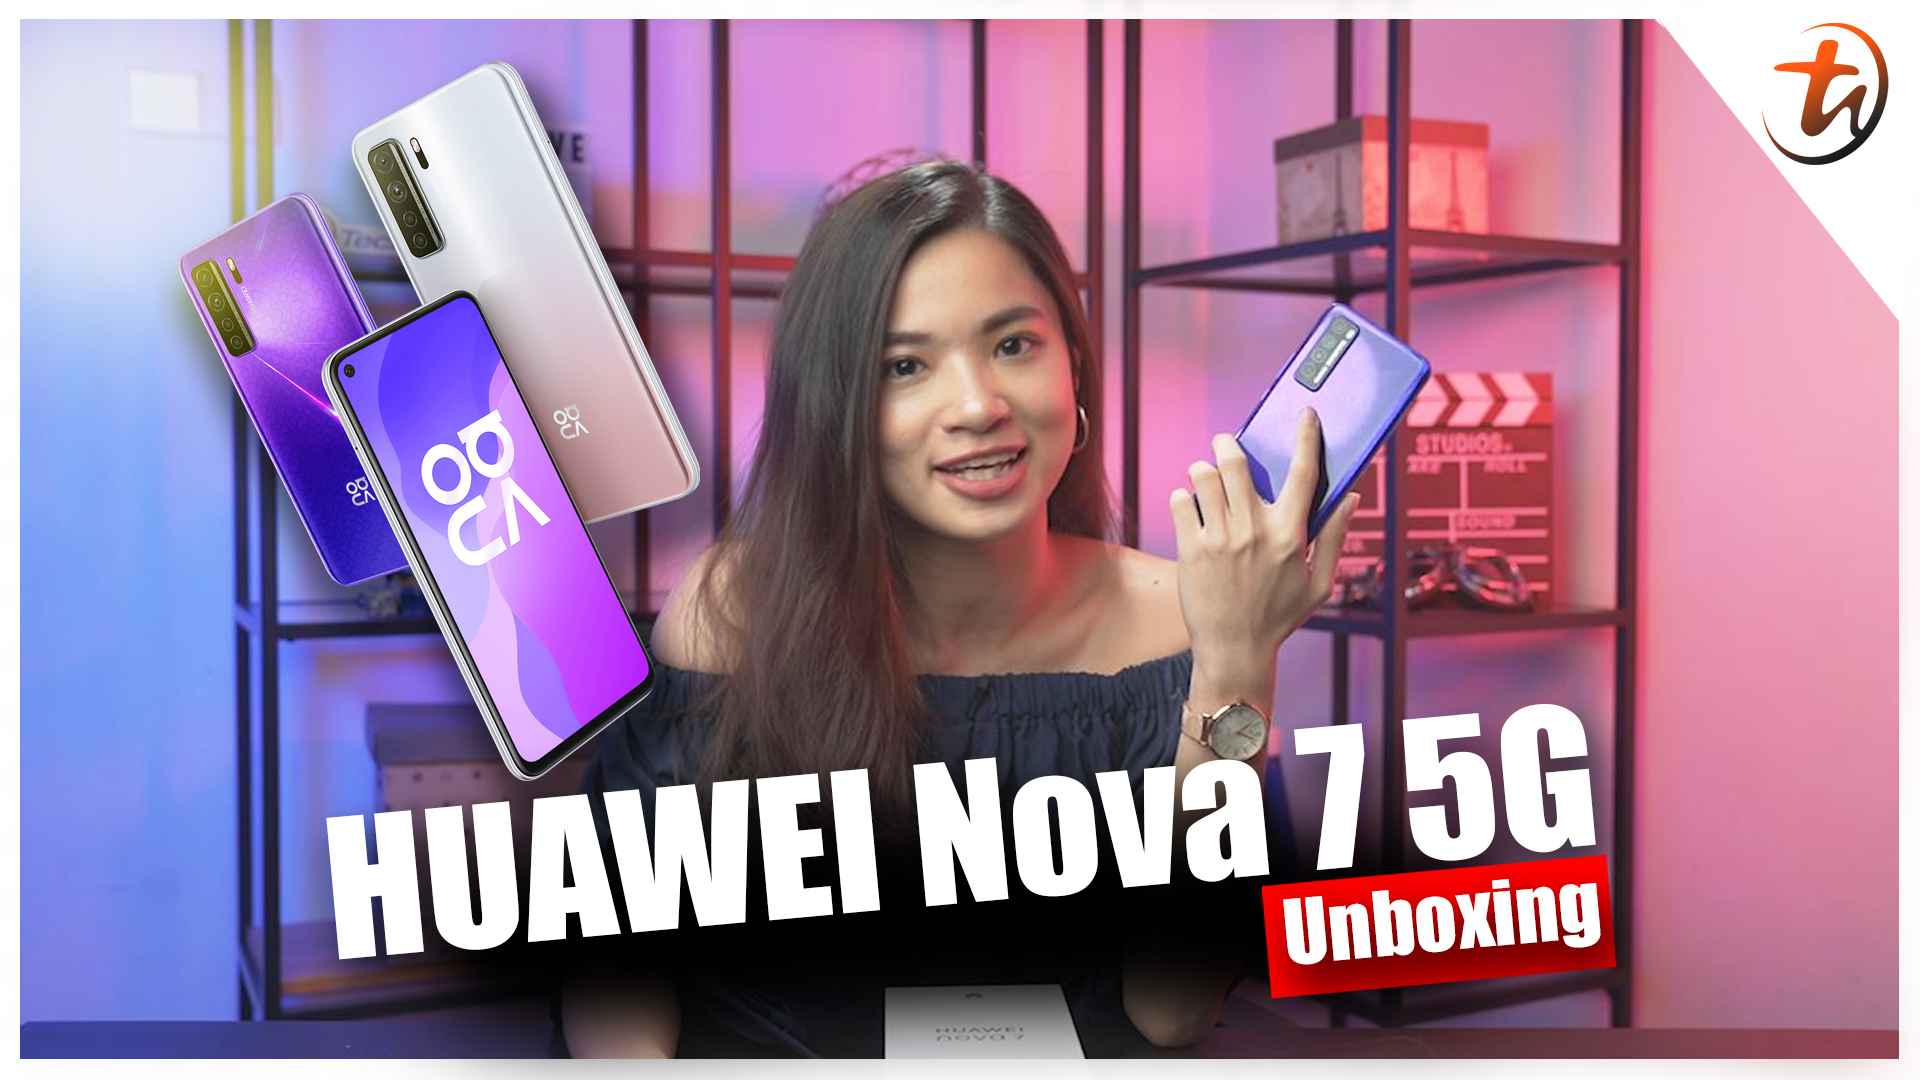 HUAWEI Nova 7 5G Unboxing and Hands-On : Kirin 985 5G chipset and 6.53-inch OLED punch-hole FullView 1080p display!